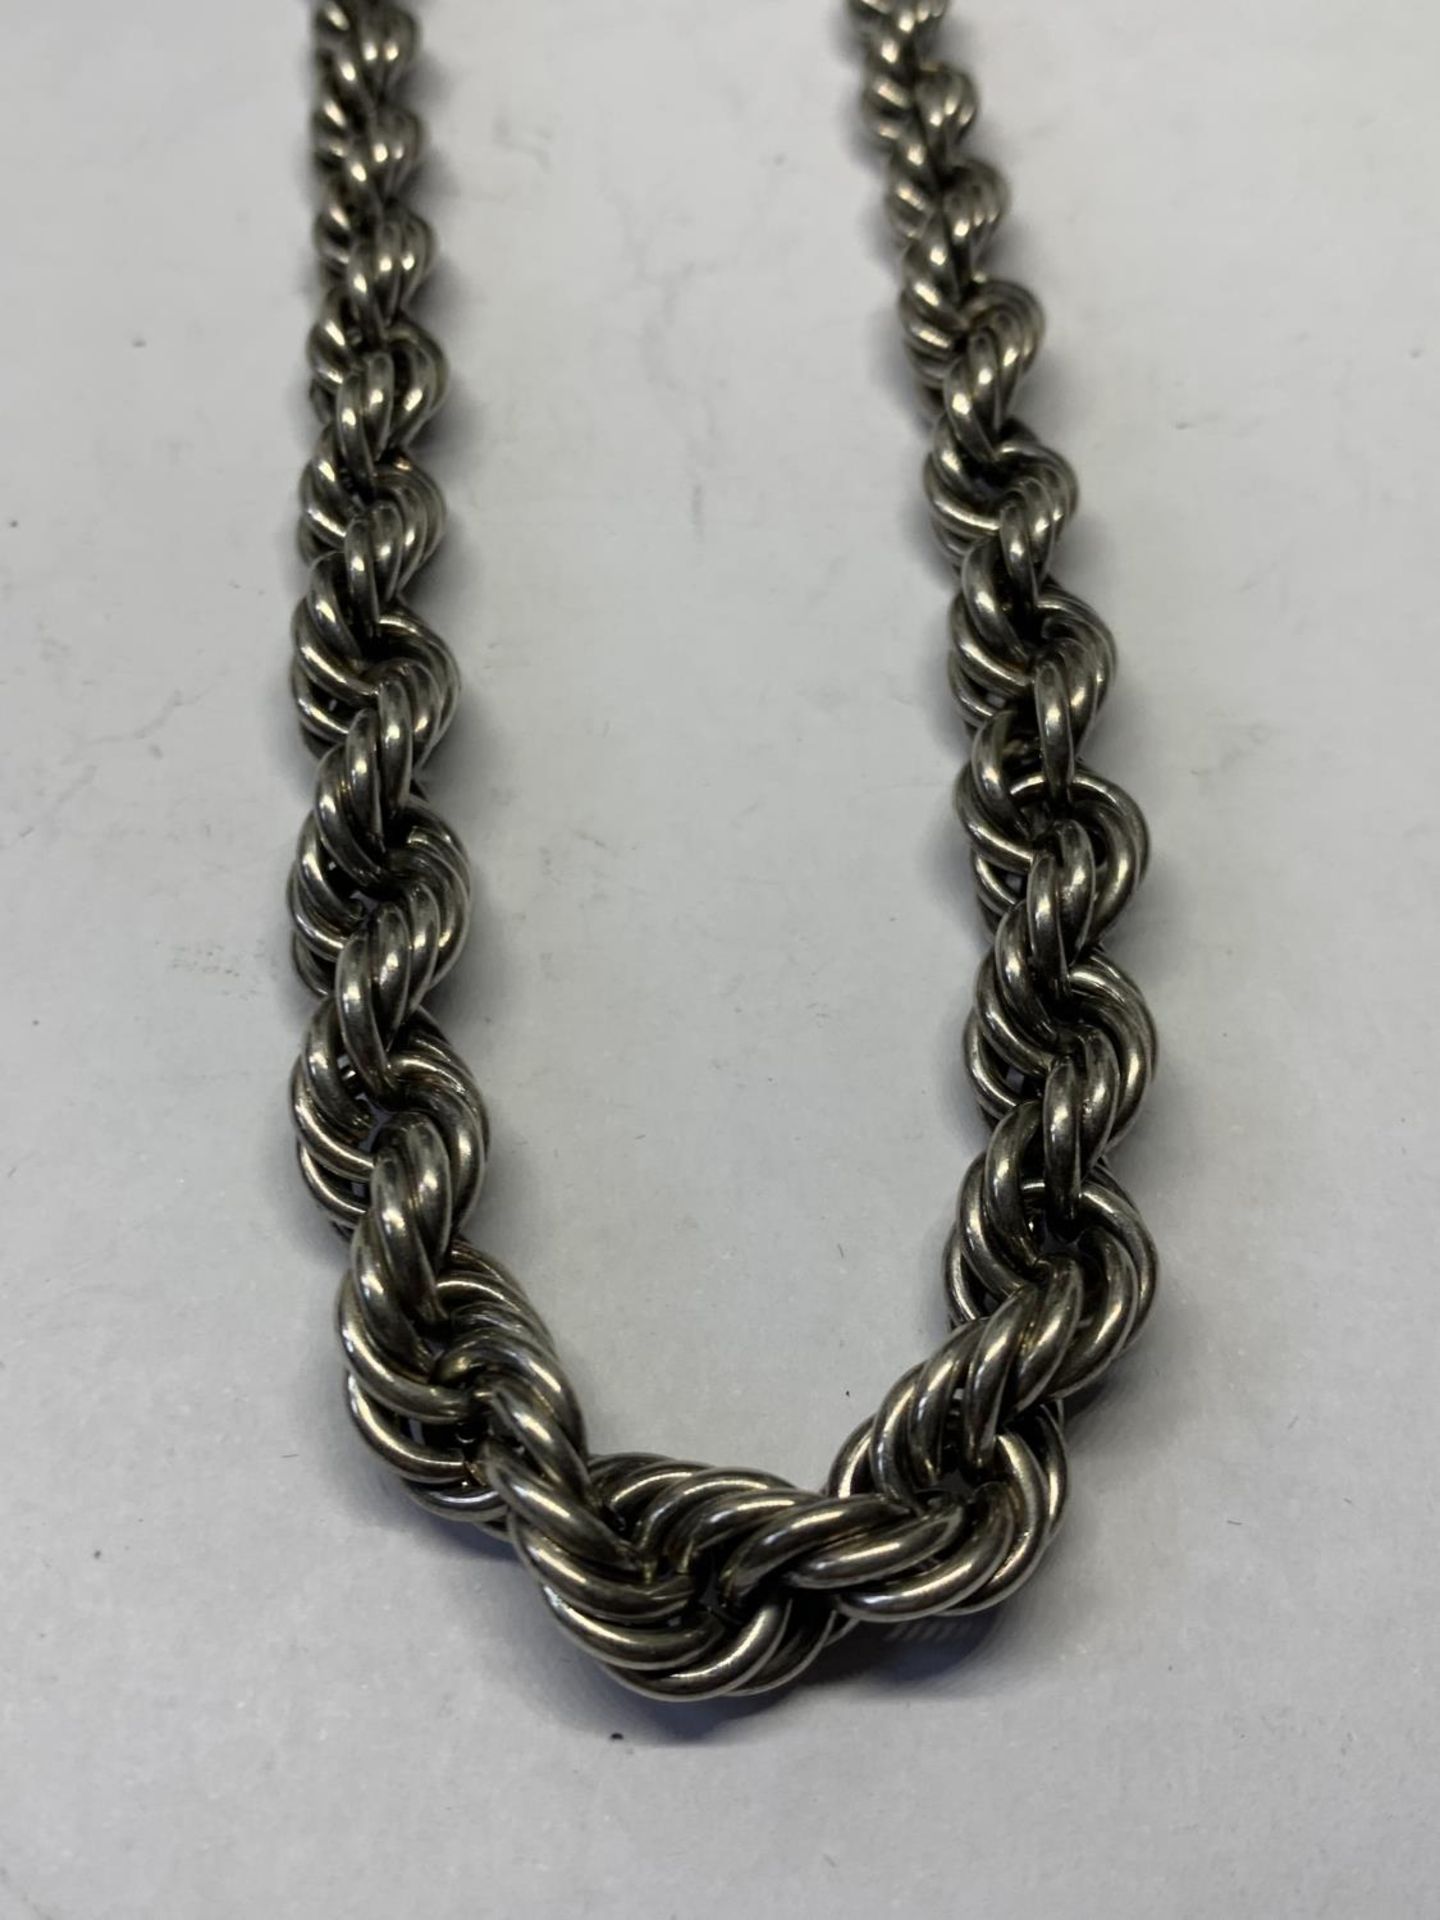 A SILVER ROPE CHAIN LENGTH 18" - Image 2 of 3